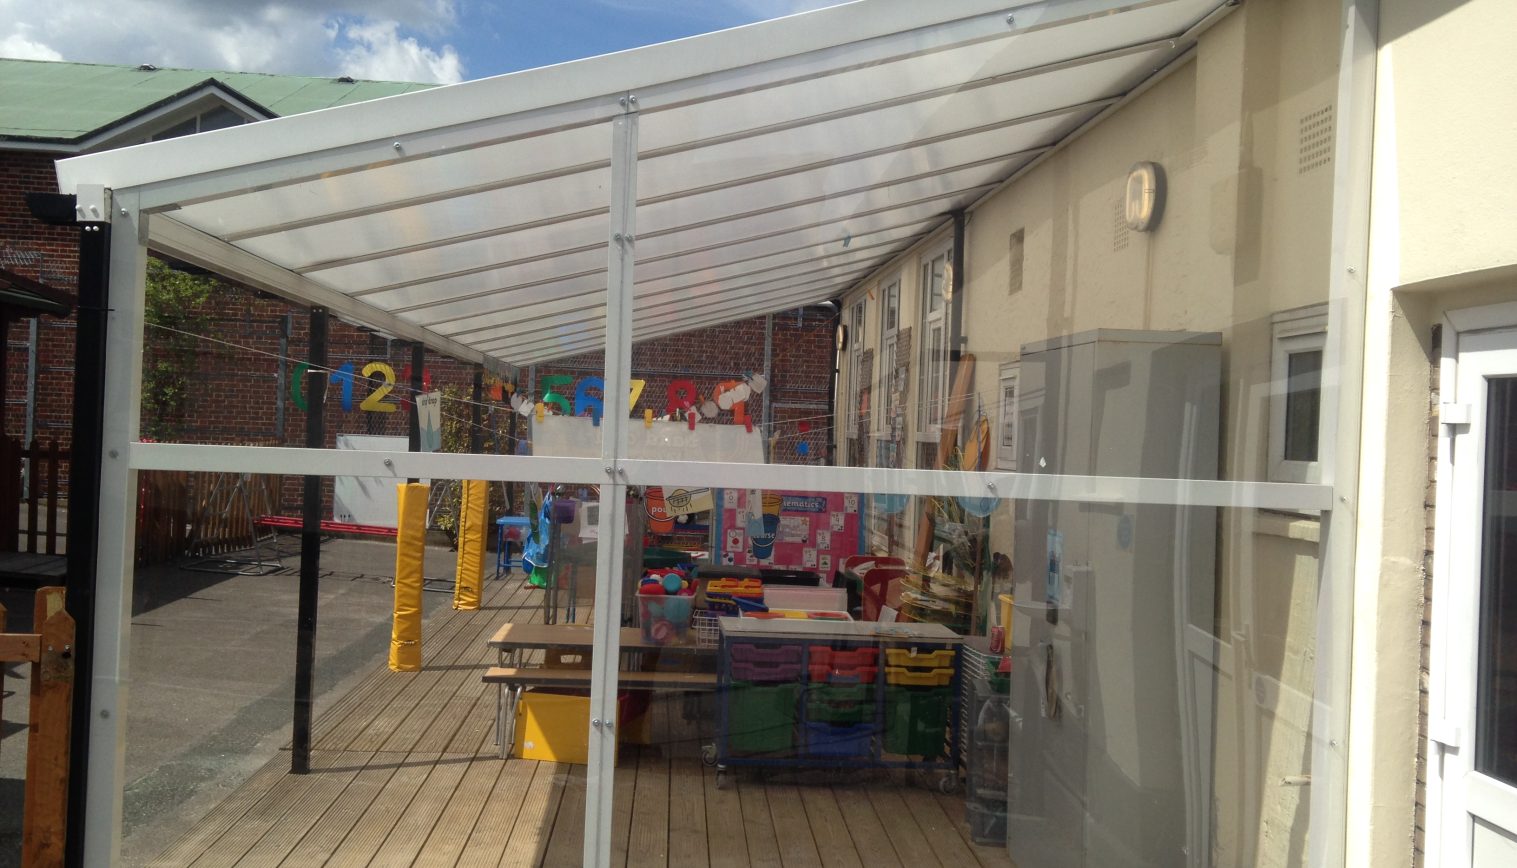 The Good Shepherd Primary School – 1st Wall Mounted Canopy